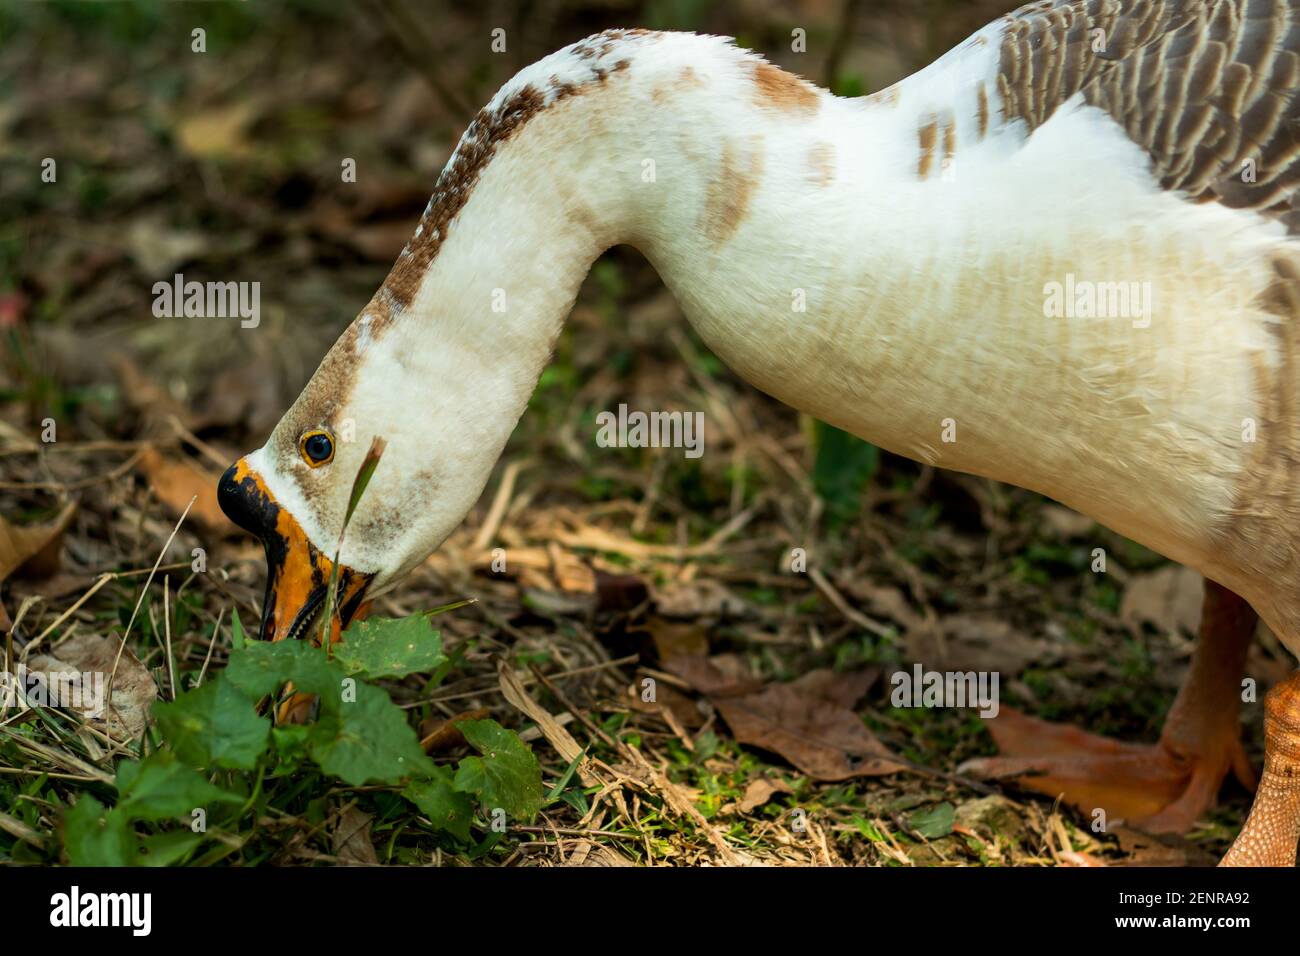 The Freckled Duck or Stictonetta naevosa, Anserini is a tribe of ducks containing the geese and swans, tribe Stictonettini, Ducks, Geese, and Swans Stock Photo